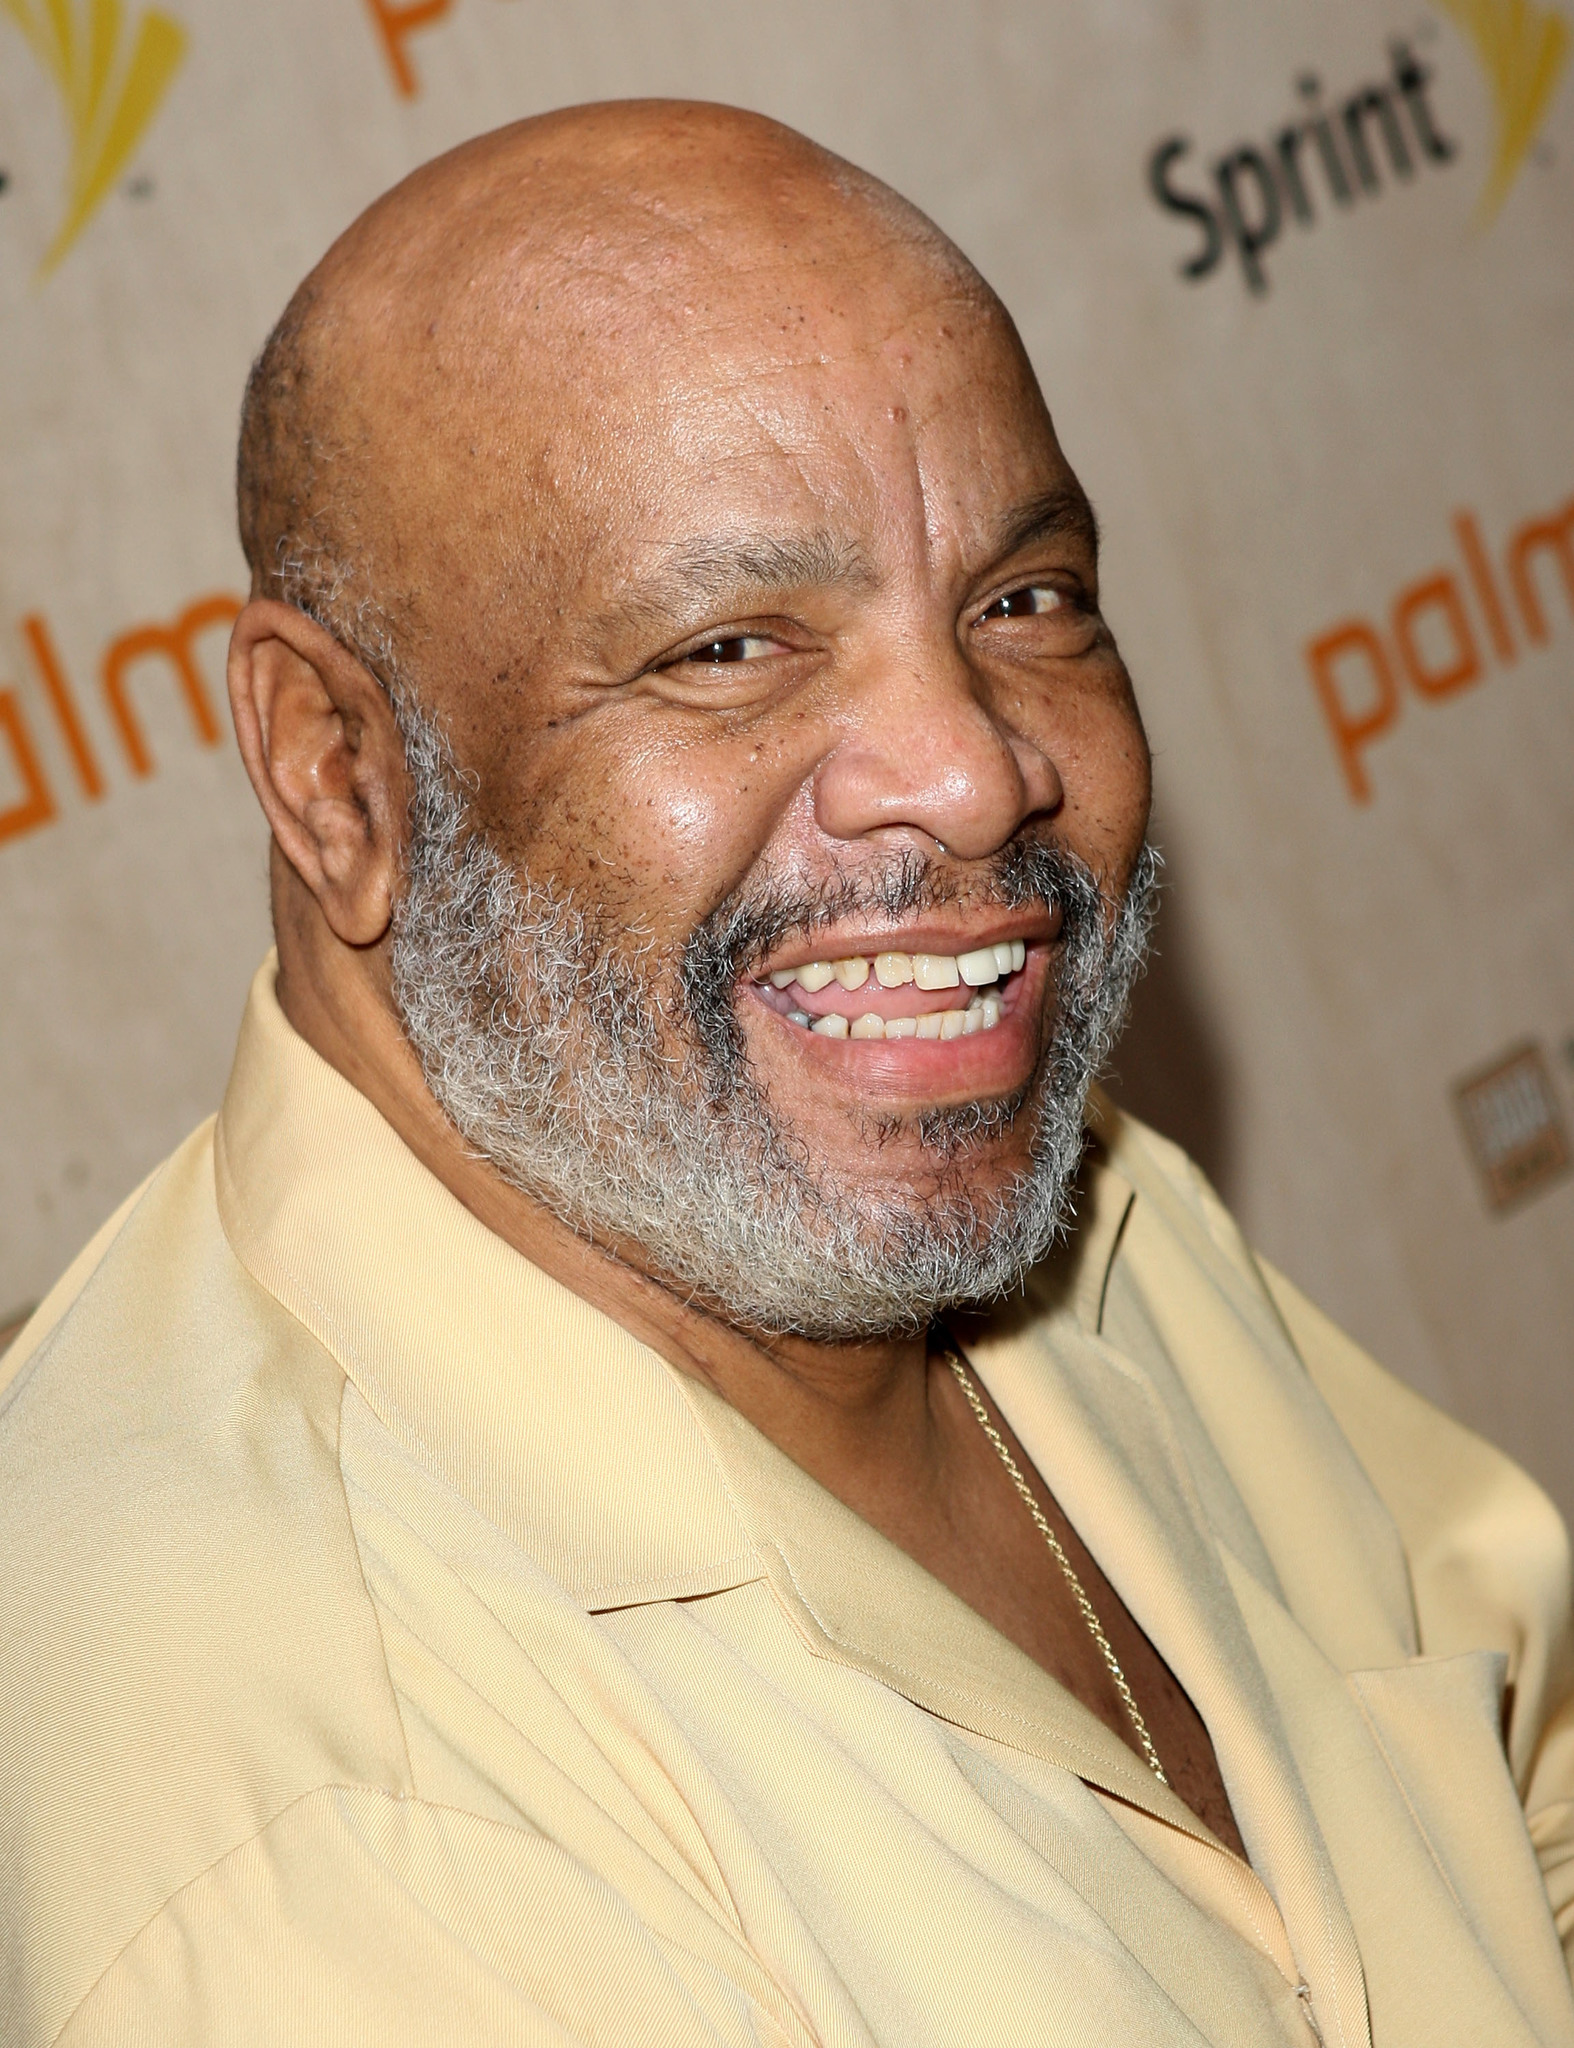 Introducing you to James L. Avery